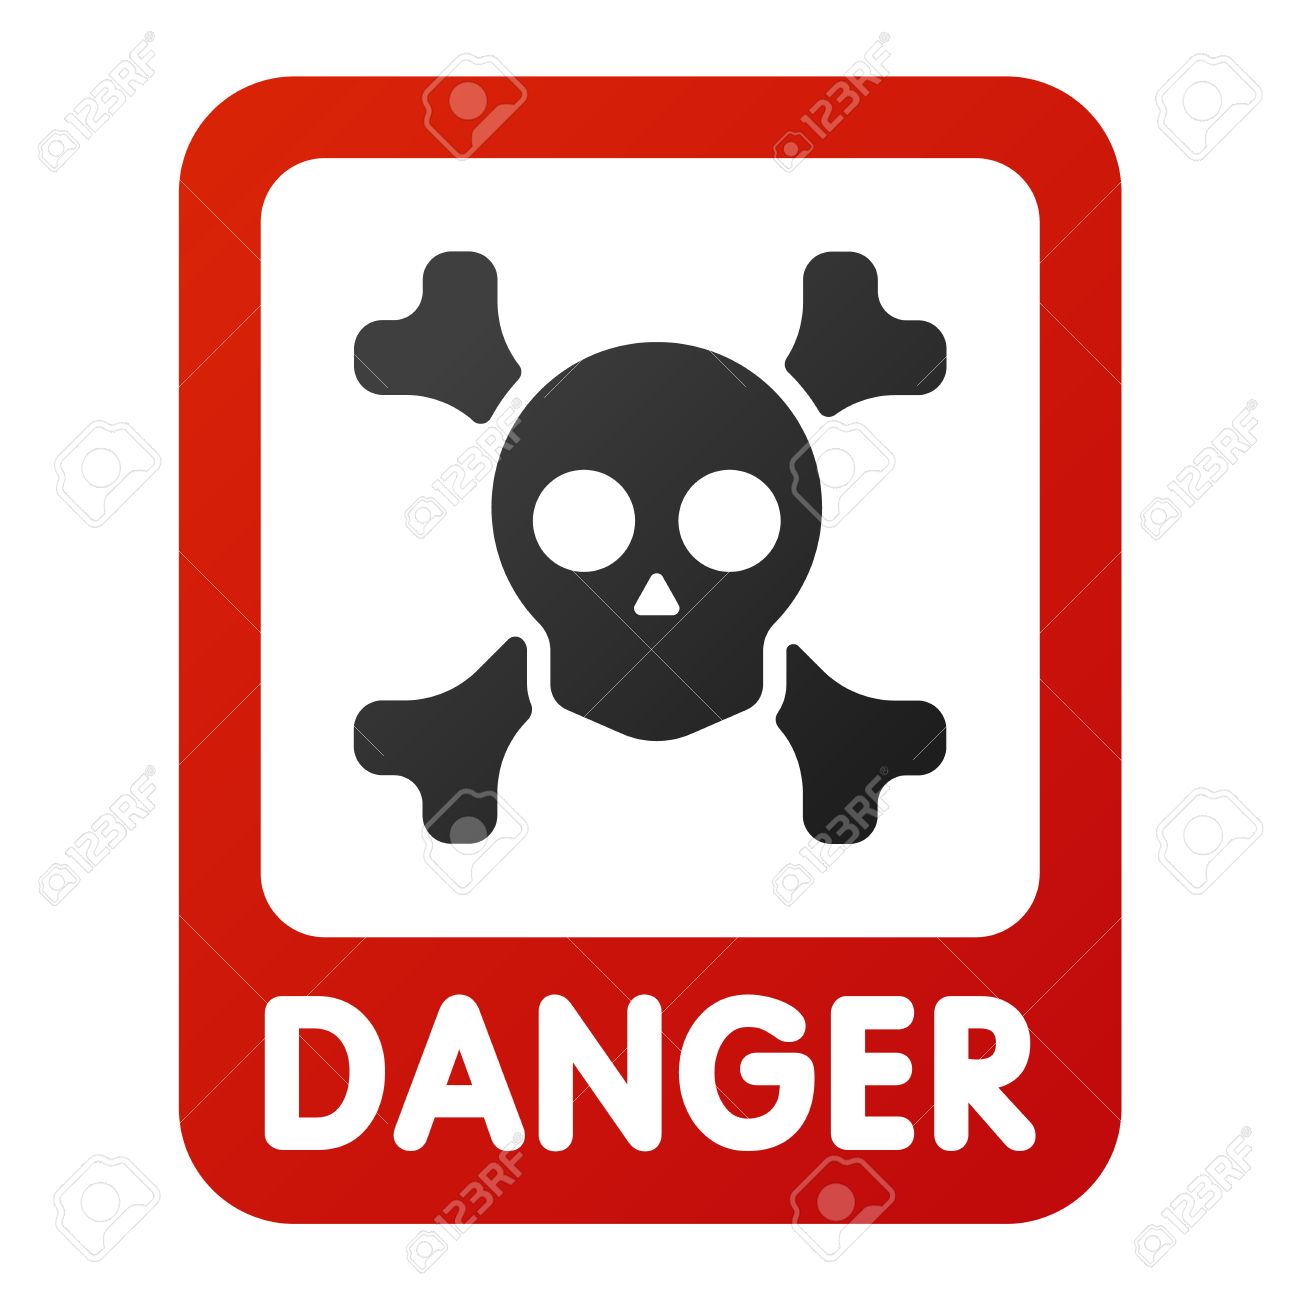 Clipart of Safety and danger icon set k7873515 - Search Clip Art 